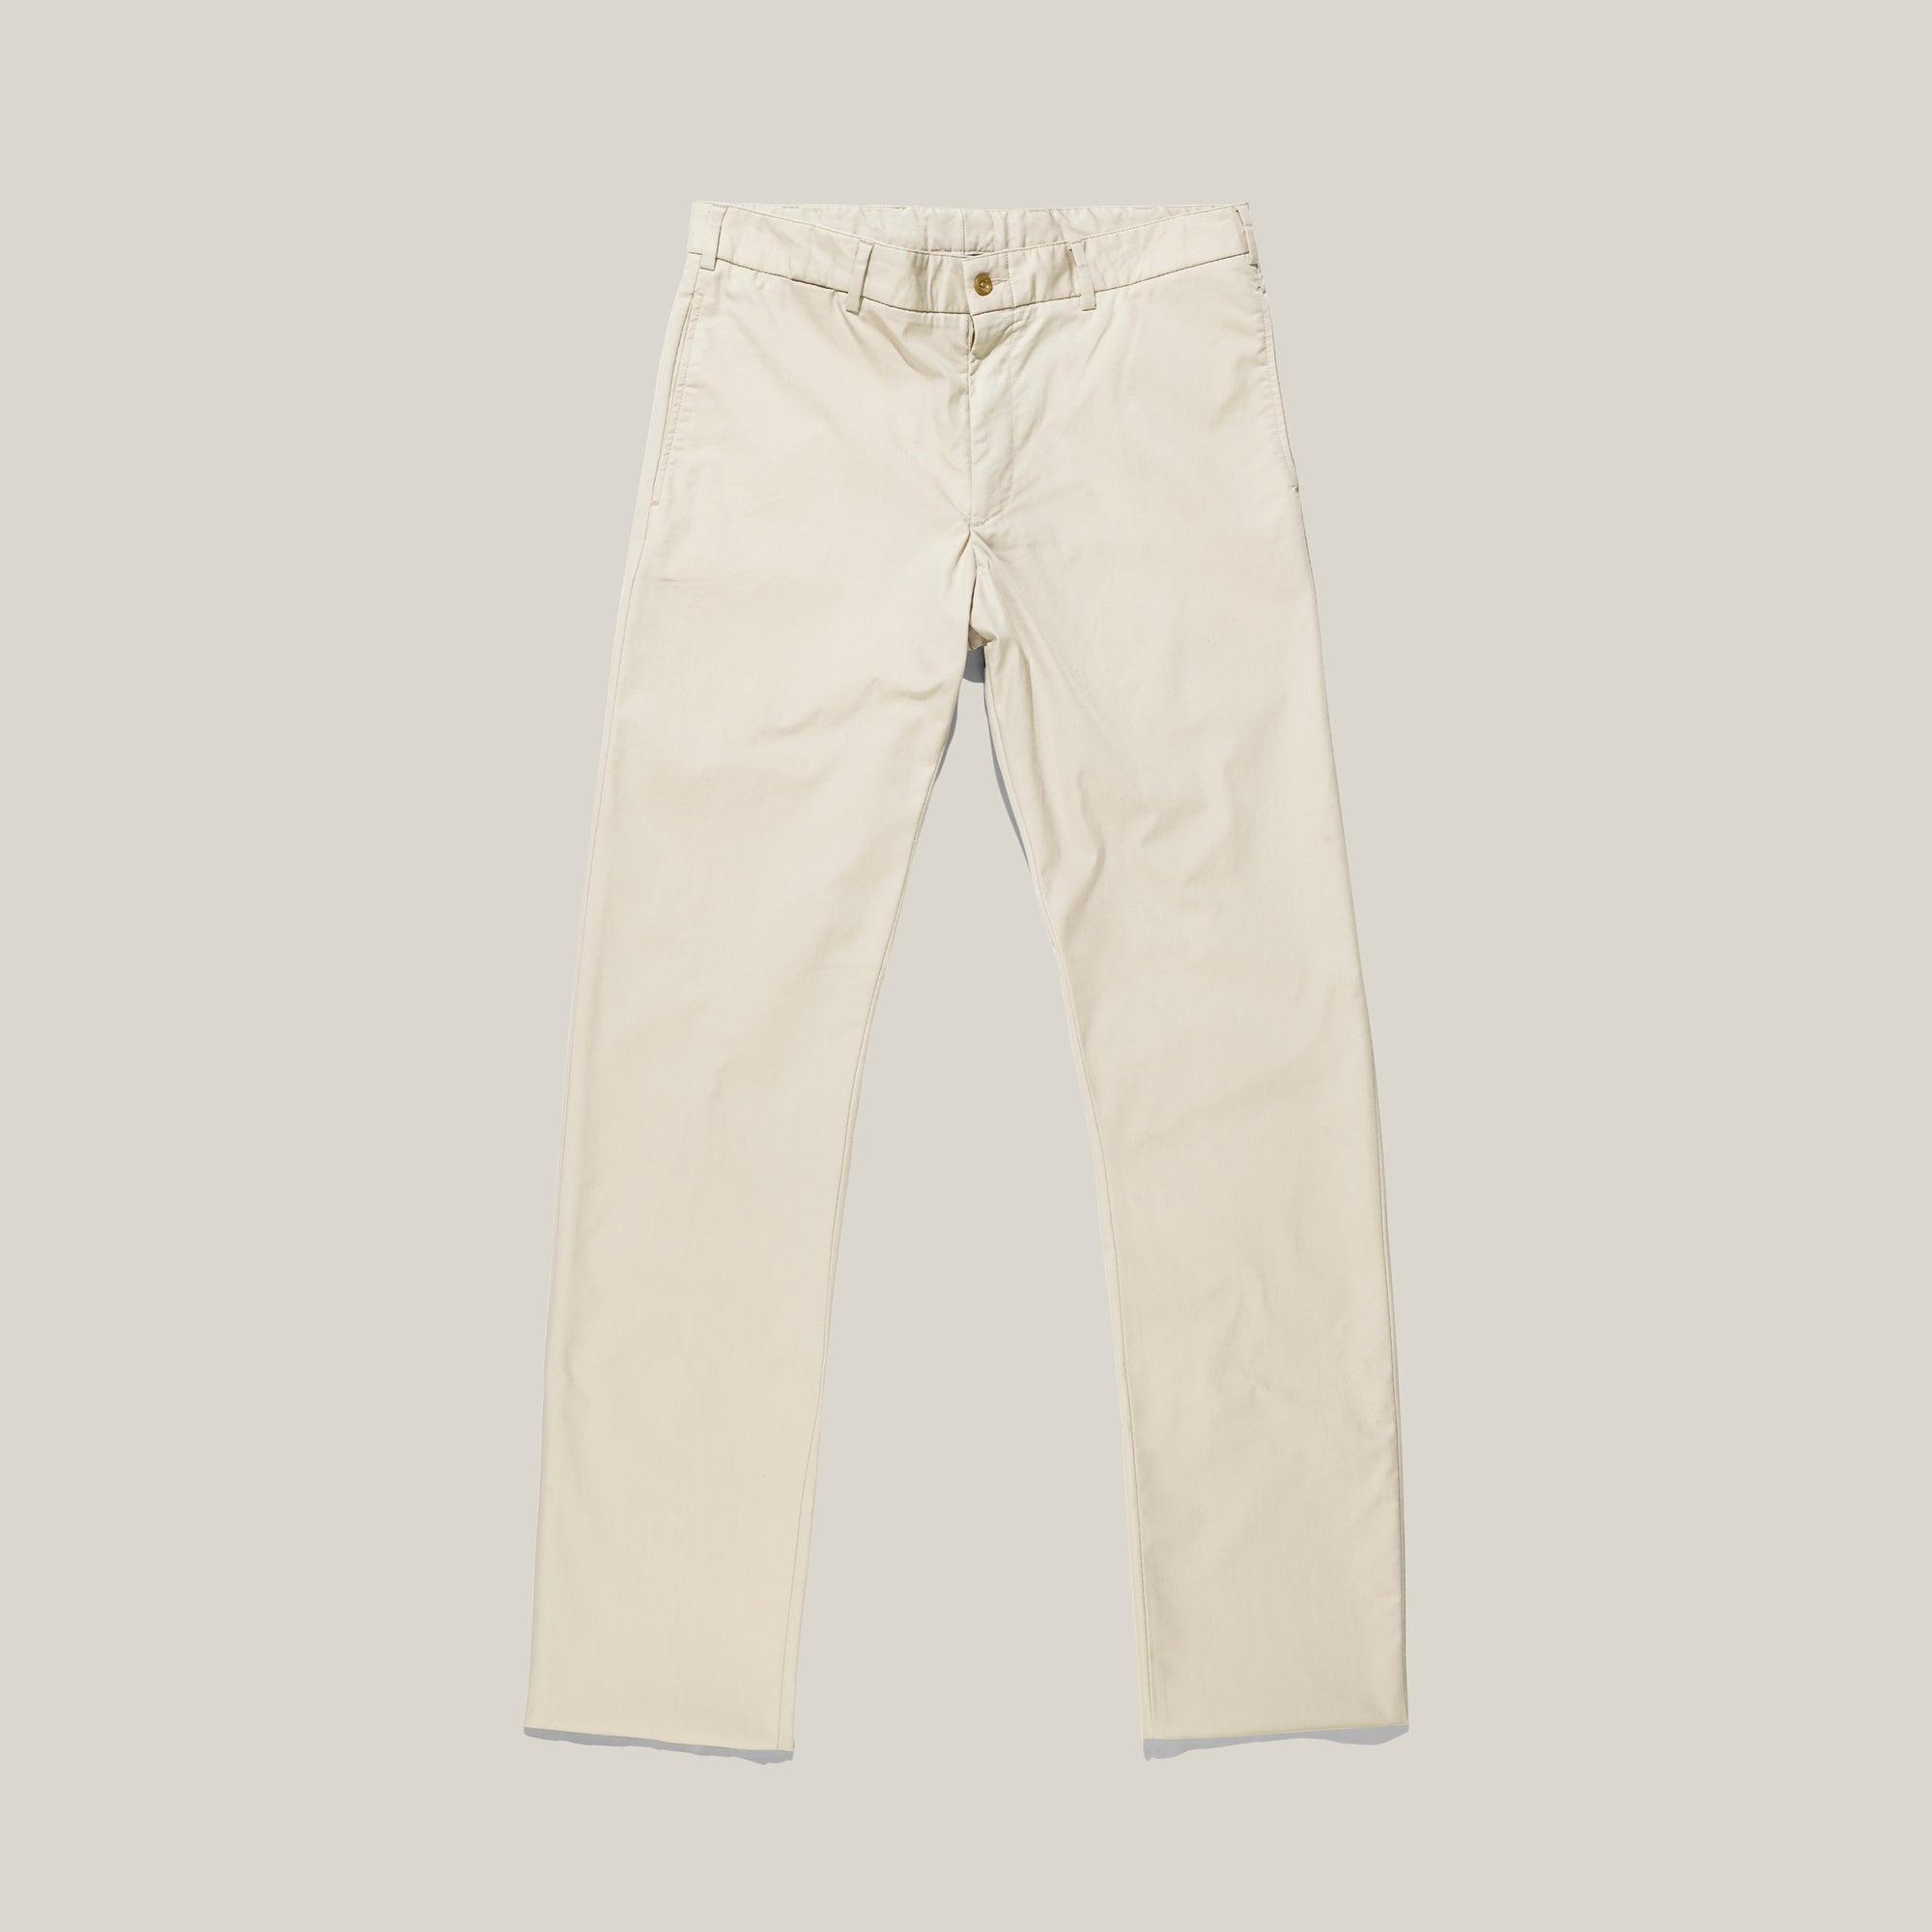 M2 Classic Fit Travel Twills in Cement (Size 30) by Bills Khakis